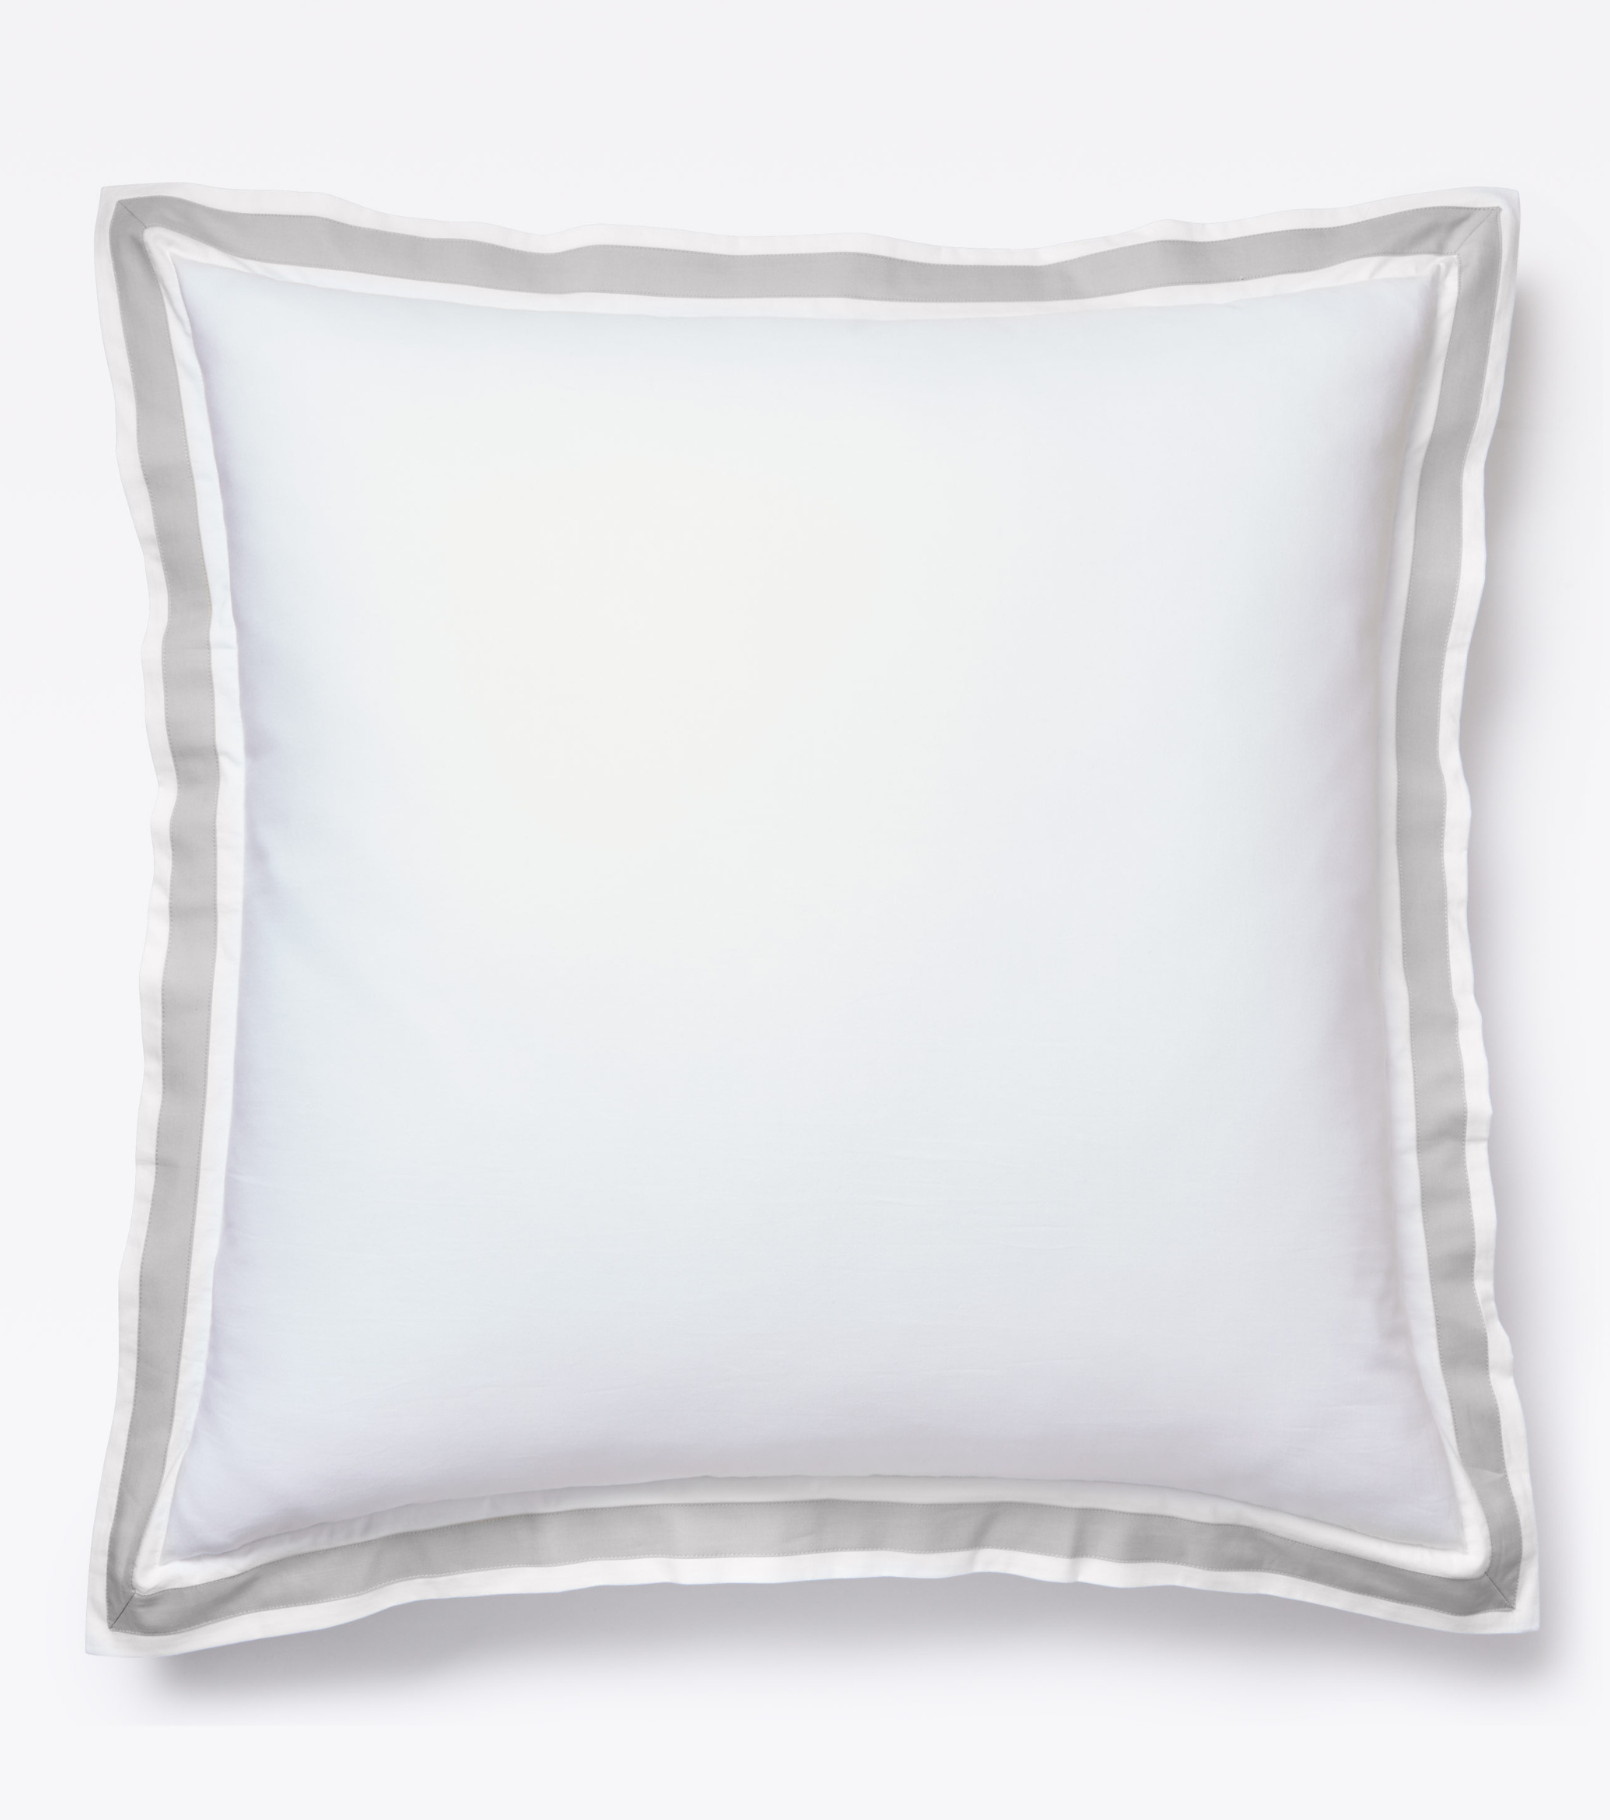 Averylily Border Frame Euro Sham in Stone. 510-thread count pure cotton percale.